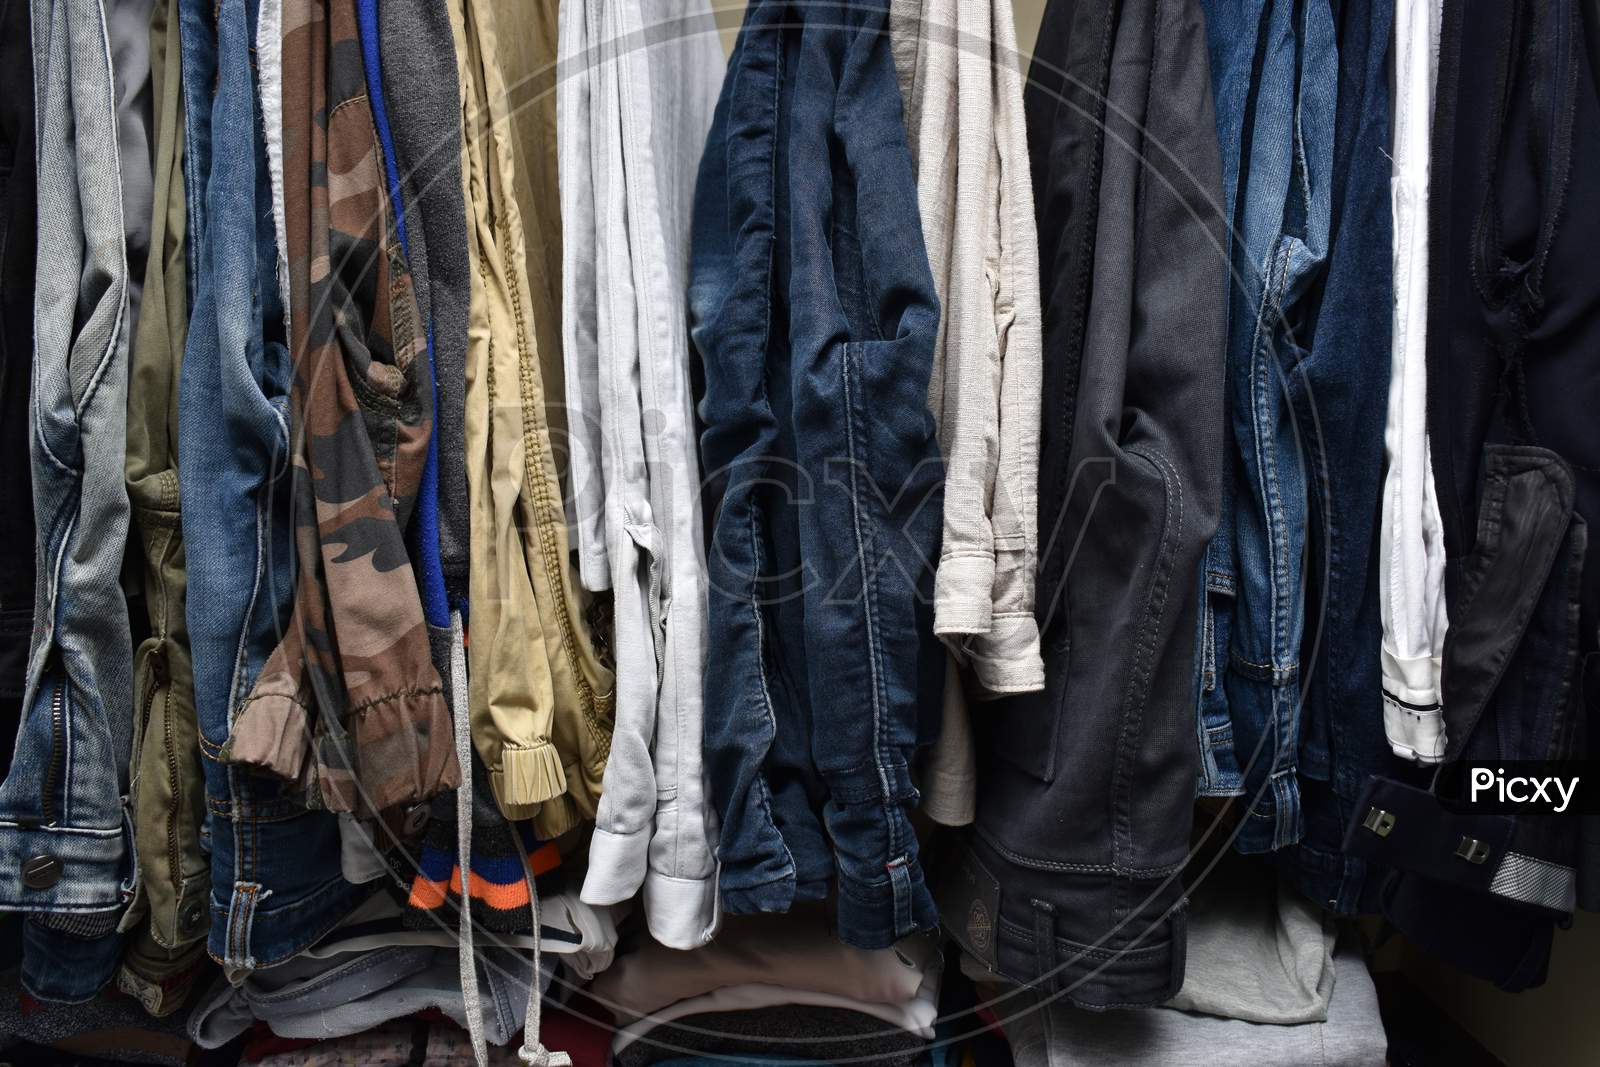 Male Wardrobe Interior View With Clothes Folded And Hung With Hanger